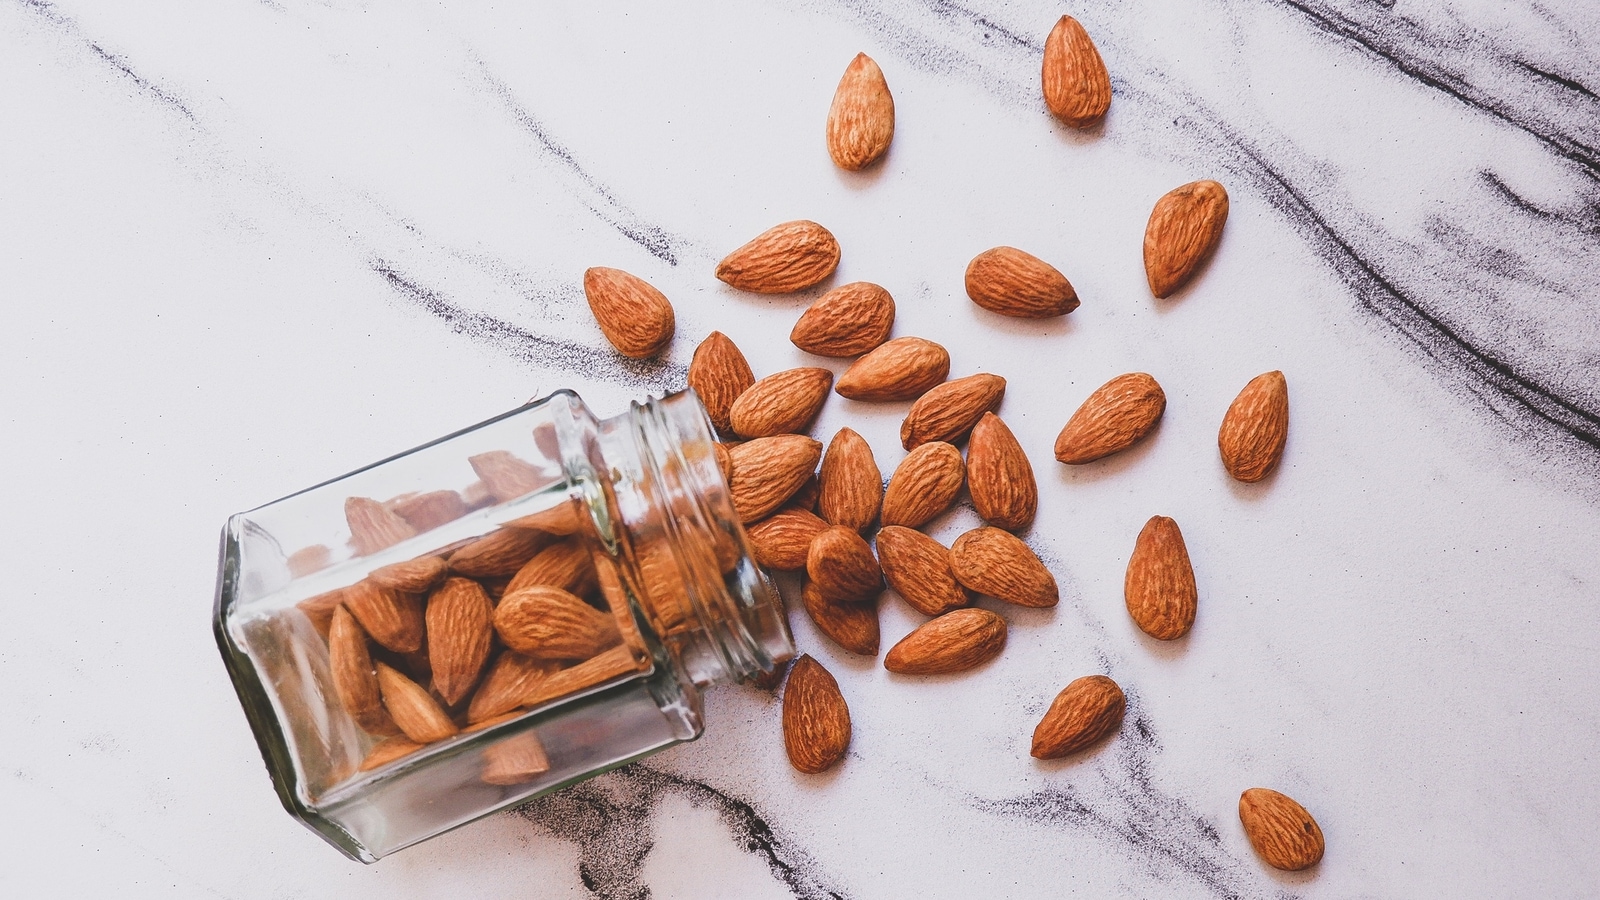 almonds-can-help-cut-calories-during-weight-loss-journey-research